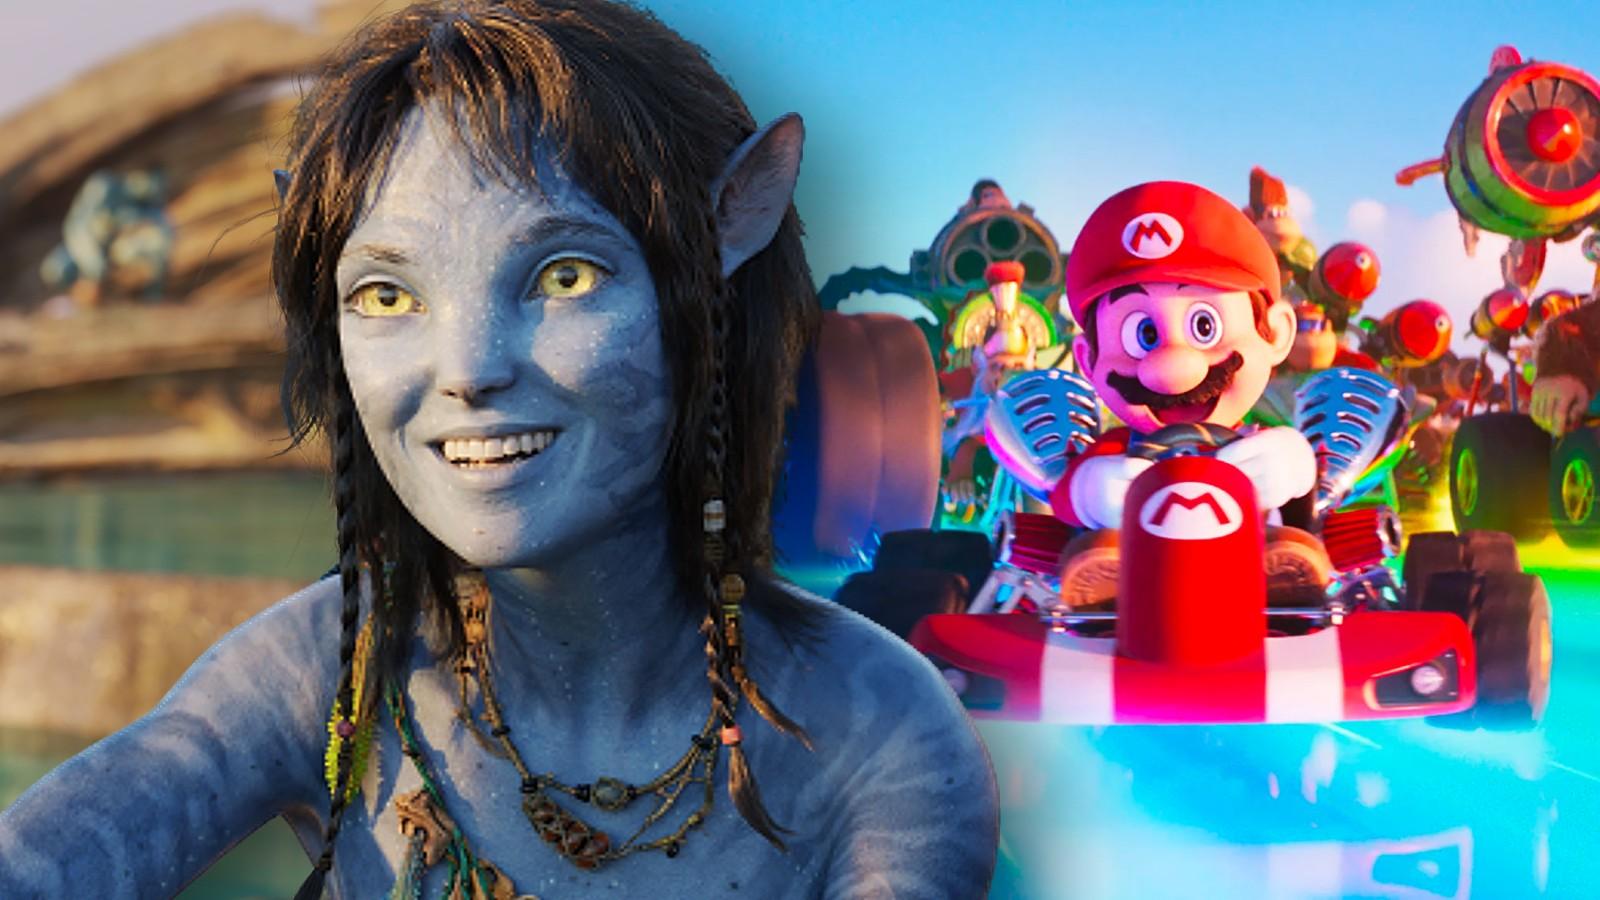 Stills from Avatar 2 and Super Mario Bros movie, two of the highest-grossing movies of all time